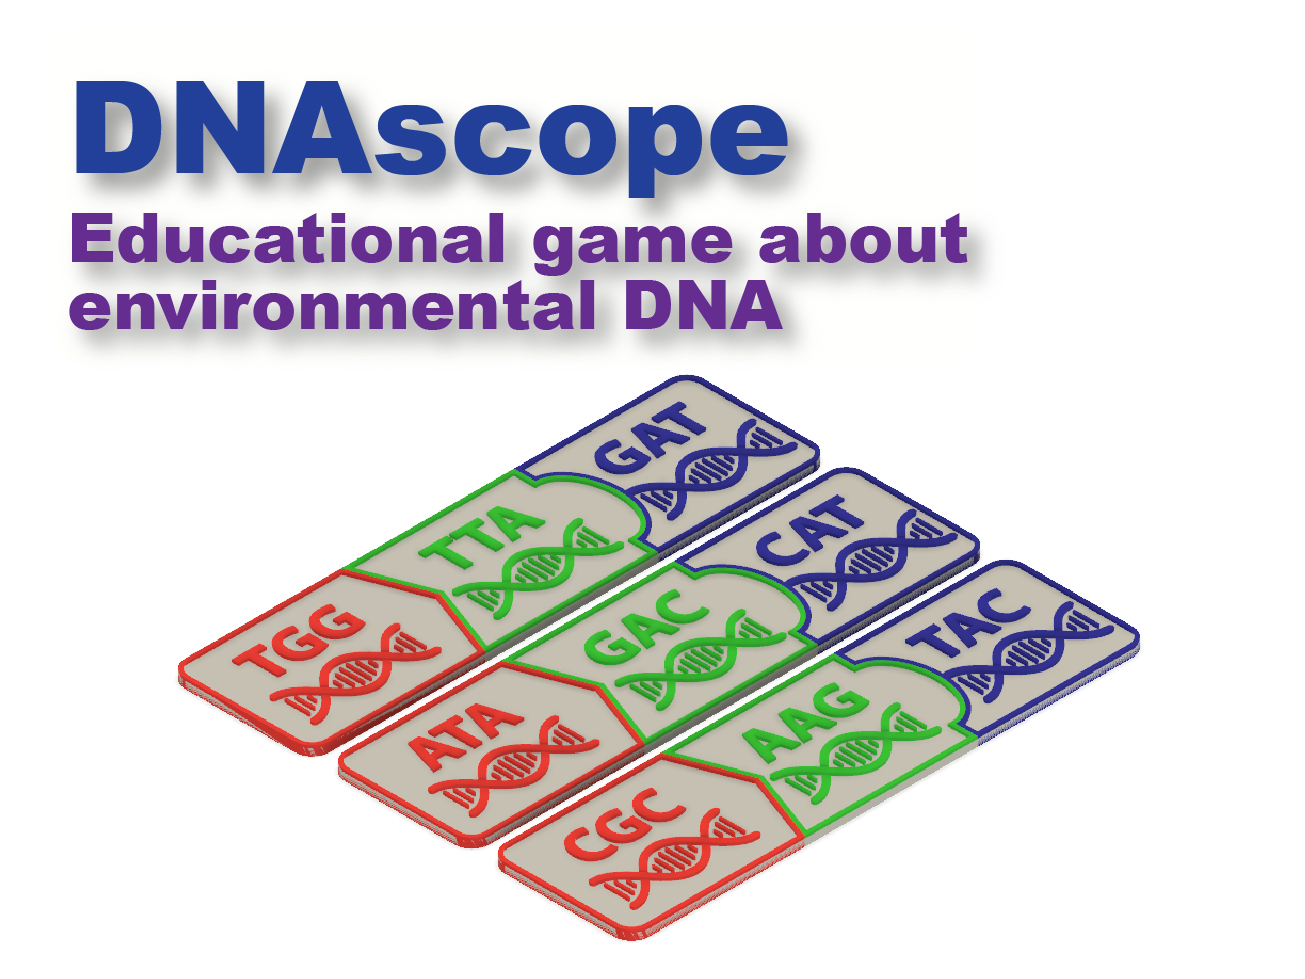 DNAscope: Learn about DNA